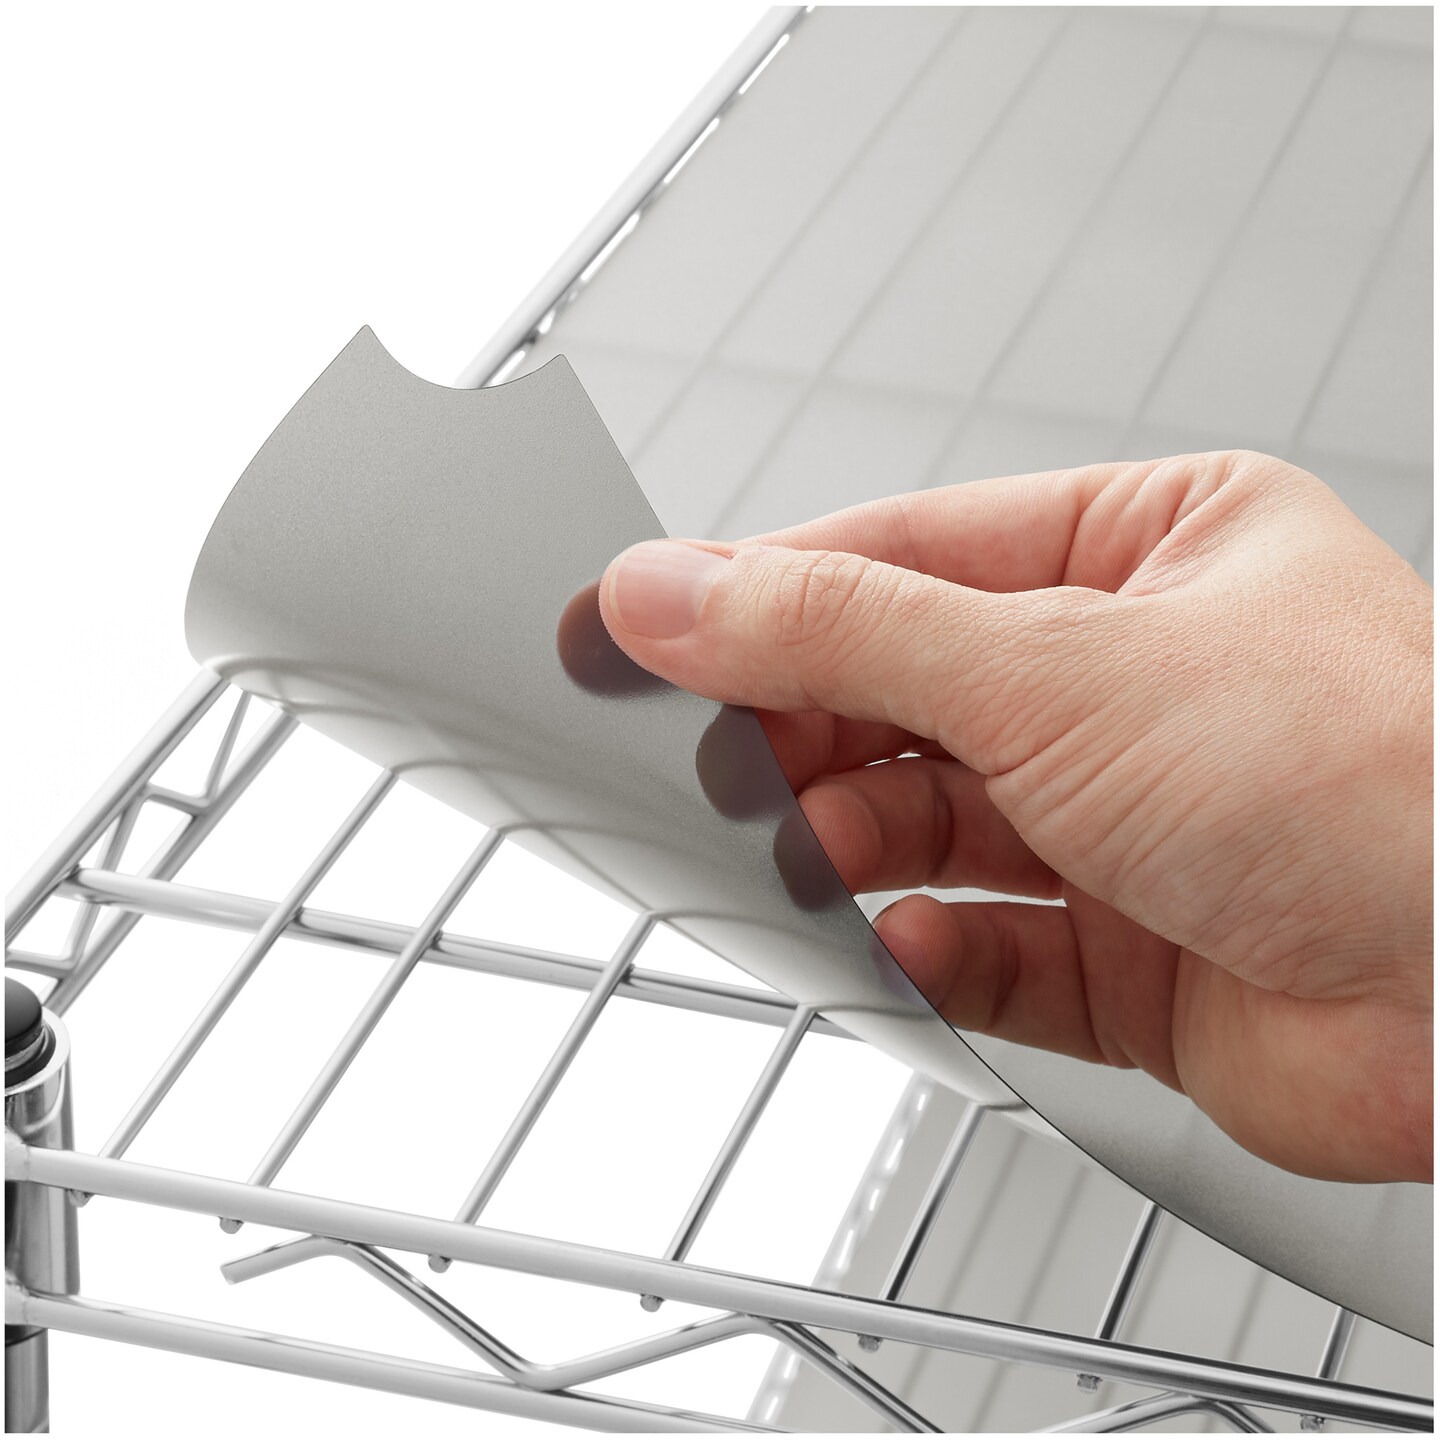 GRIDMANN Shelf Liners for Wire Rack - Commercial-Grade Plastic Pre-Cut Shelving Covers